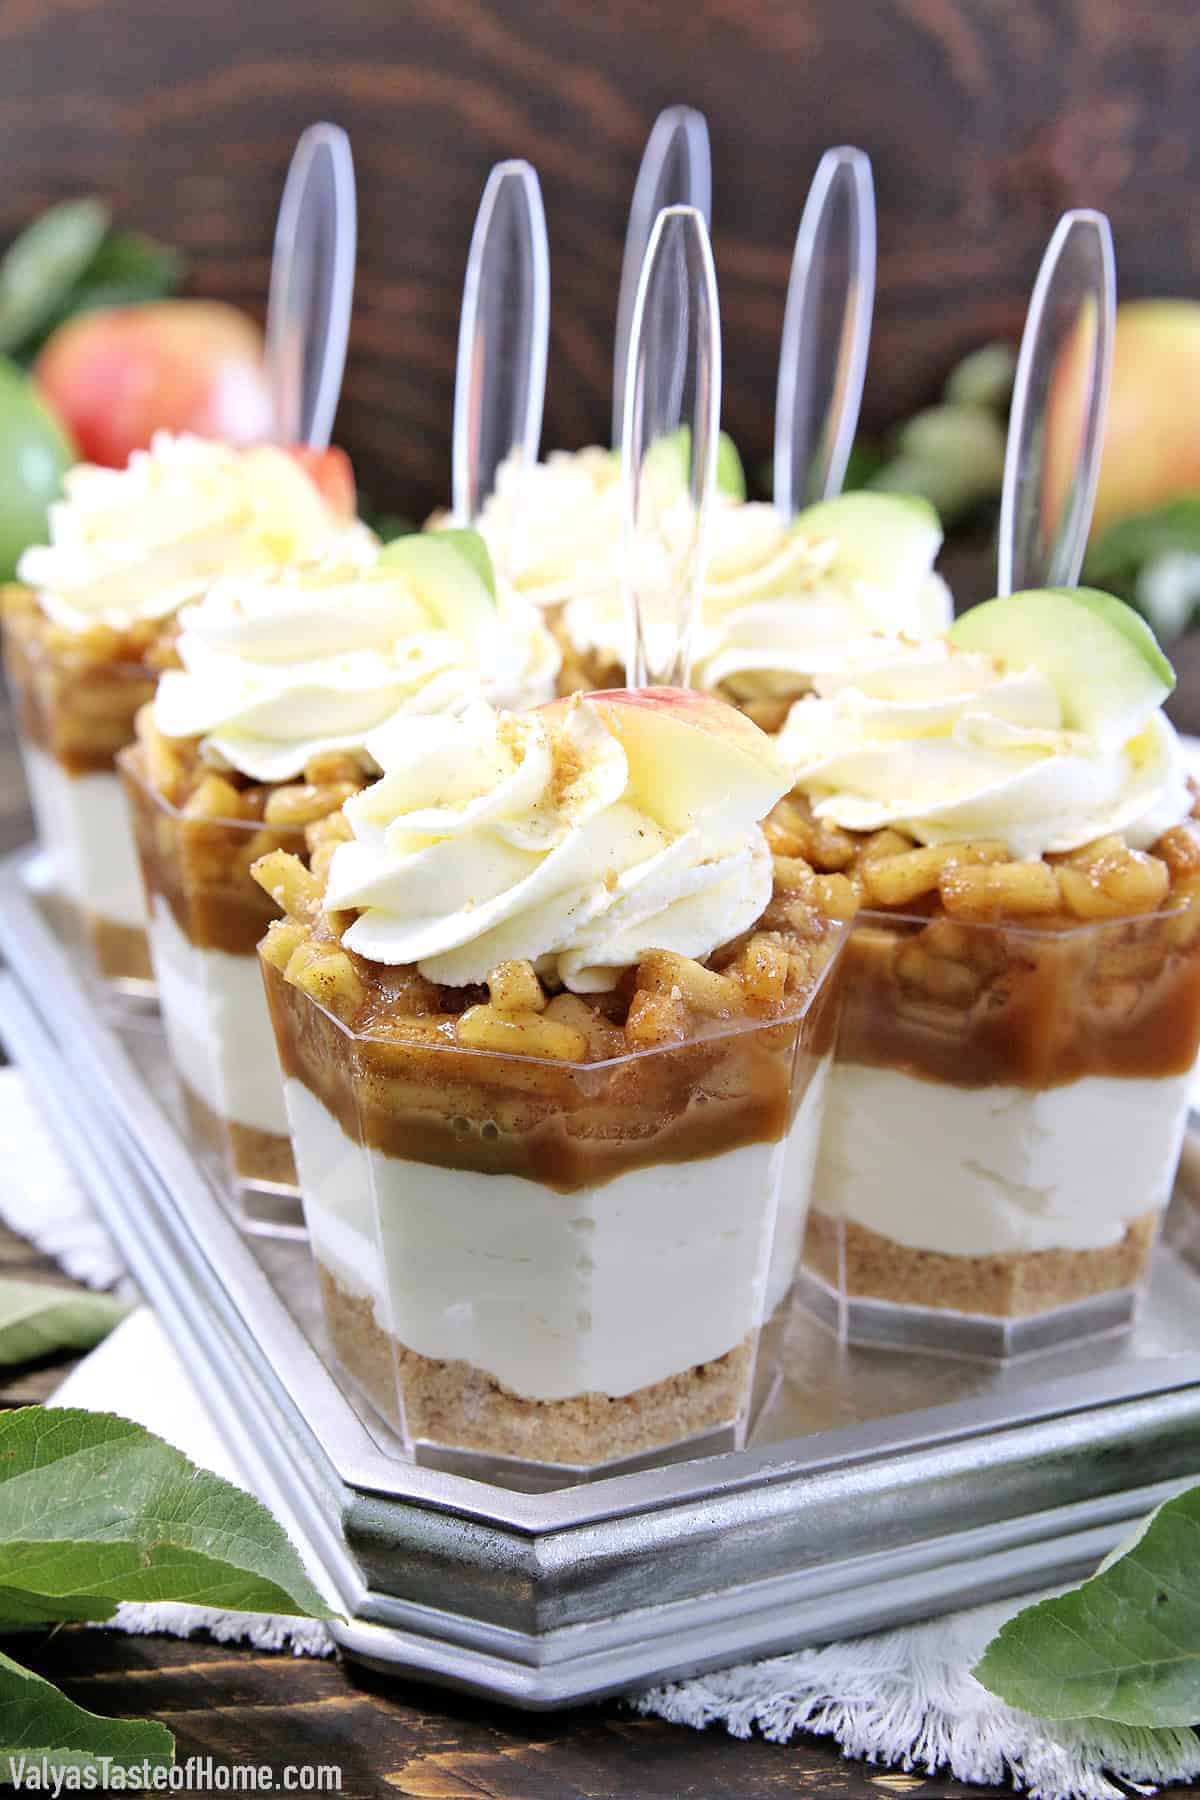 The Best Apple Pie Cheeesecake Parfaits Fall is one of the best seasons for desserts! Cinnamon, maple, pecan, and pumpkin are just a few of my favorite fall flavors to play with! When the leaves start changing their color, and the cooler autumn weather with its crisp air remind us that the cold is coming, it's time to cozy up with a blanket and one of these delicious heartwarming treats in The Best Fall Dessert Recipes collection and a cup of my favorite homemade hot vanilla caramel latte.